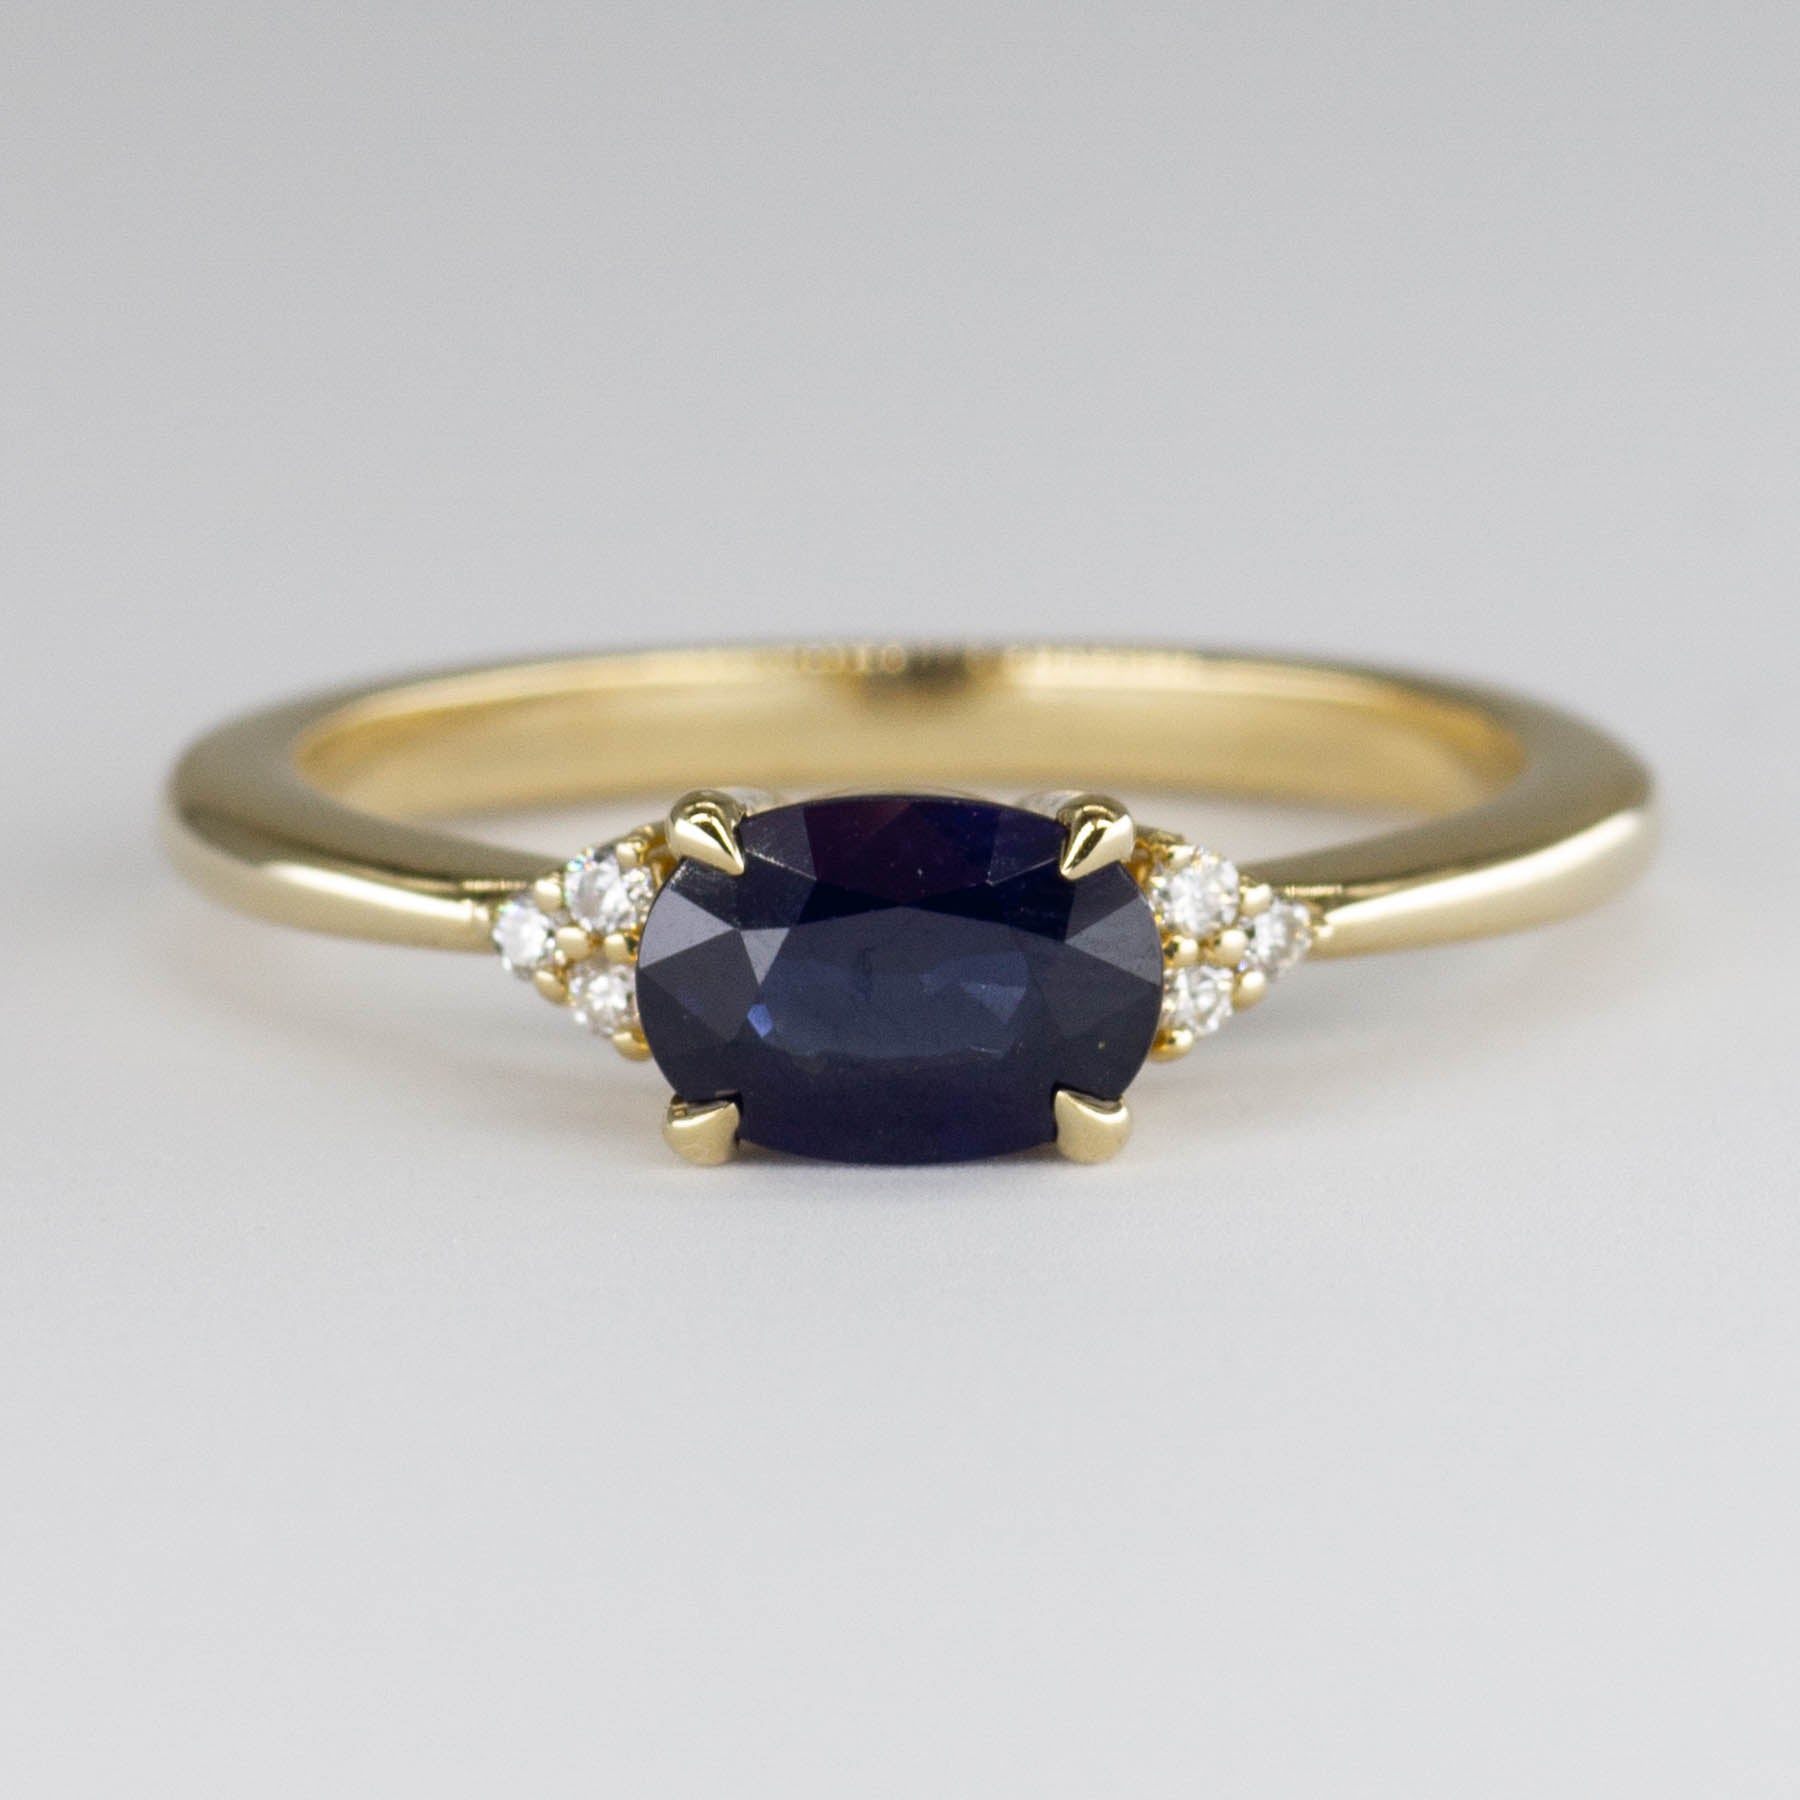 '100 Ways' 14k Yellow Gold East West Sapphire and Diamond Ring | 1.03ct | SZ 7 - 100 Ways